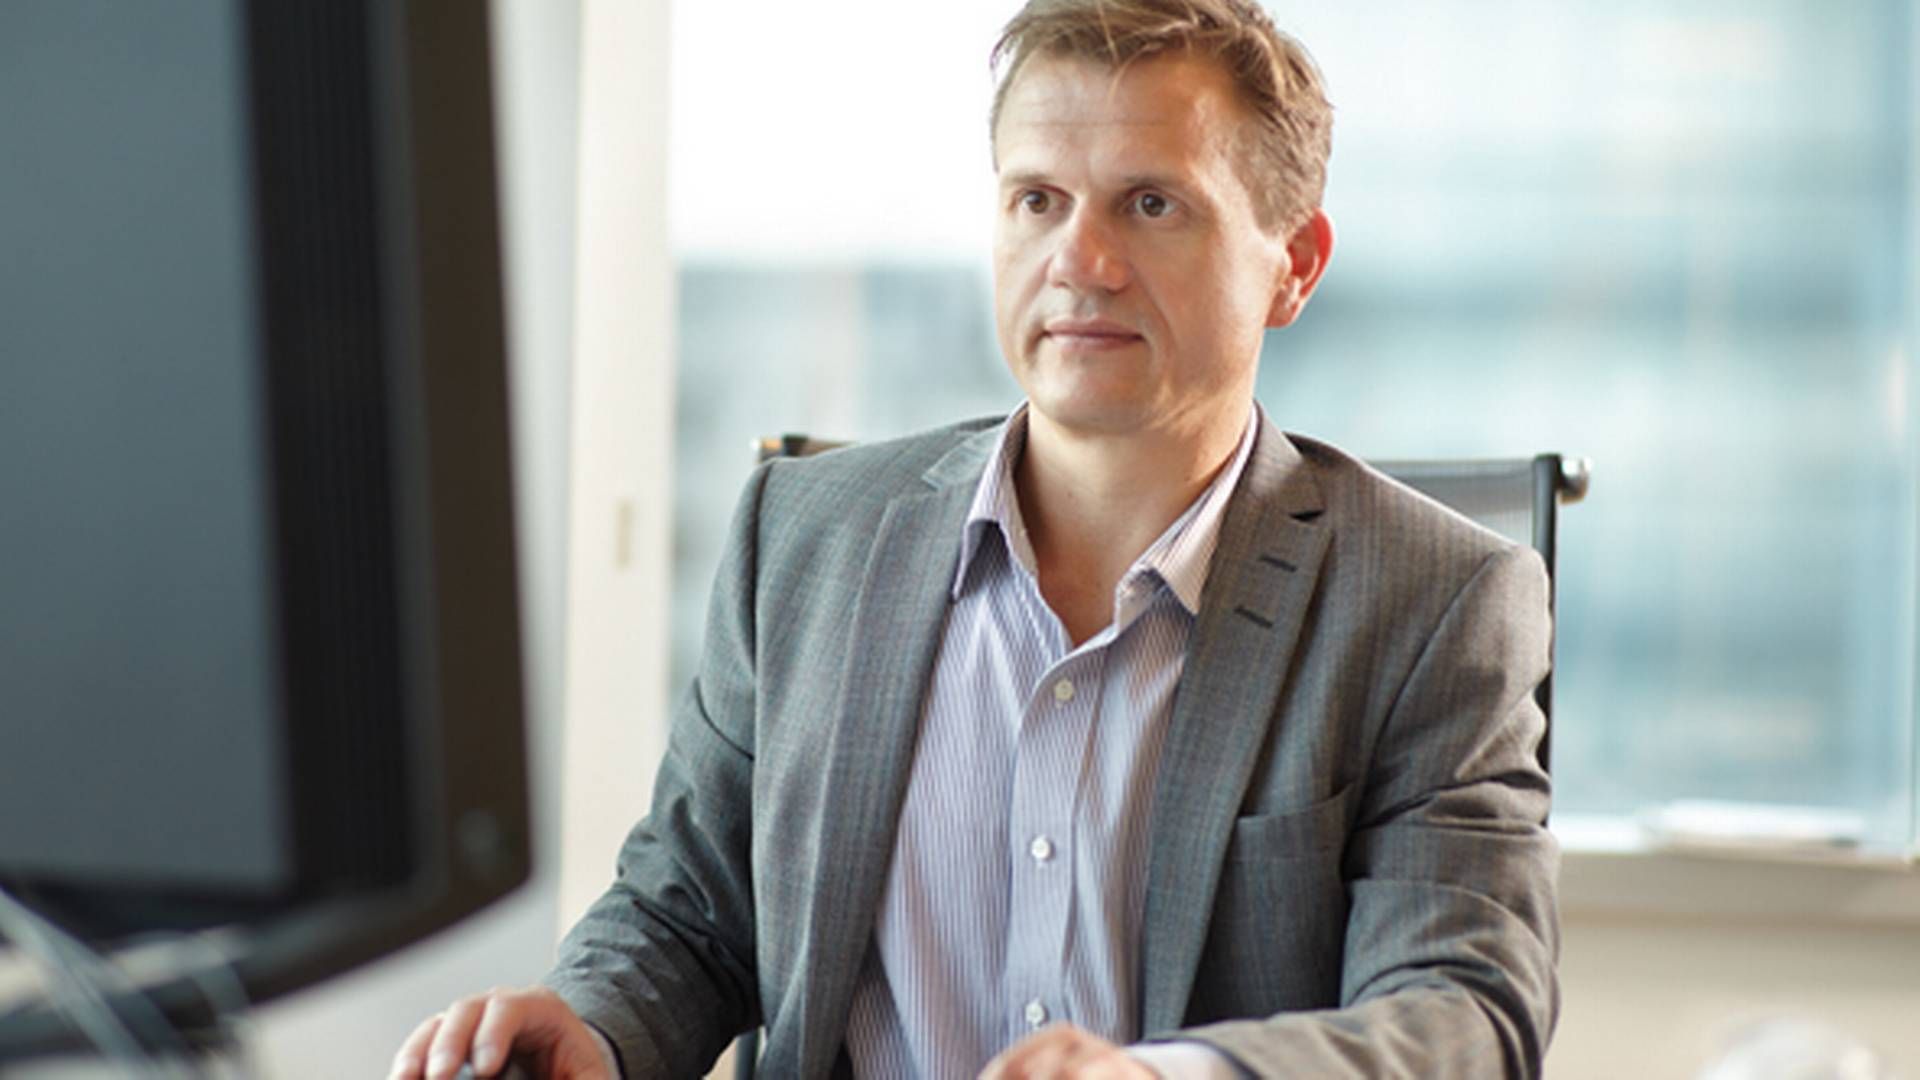 Søren Astrup, Deputy Chief Executive at Formuepleje, expects that MiFID II will lead to more consolidations between the smaller asset managers. | Photo: PR Forumepleje